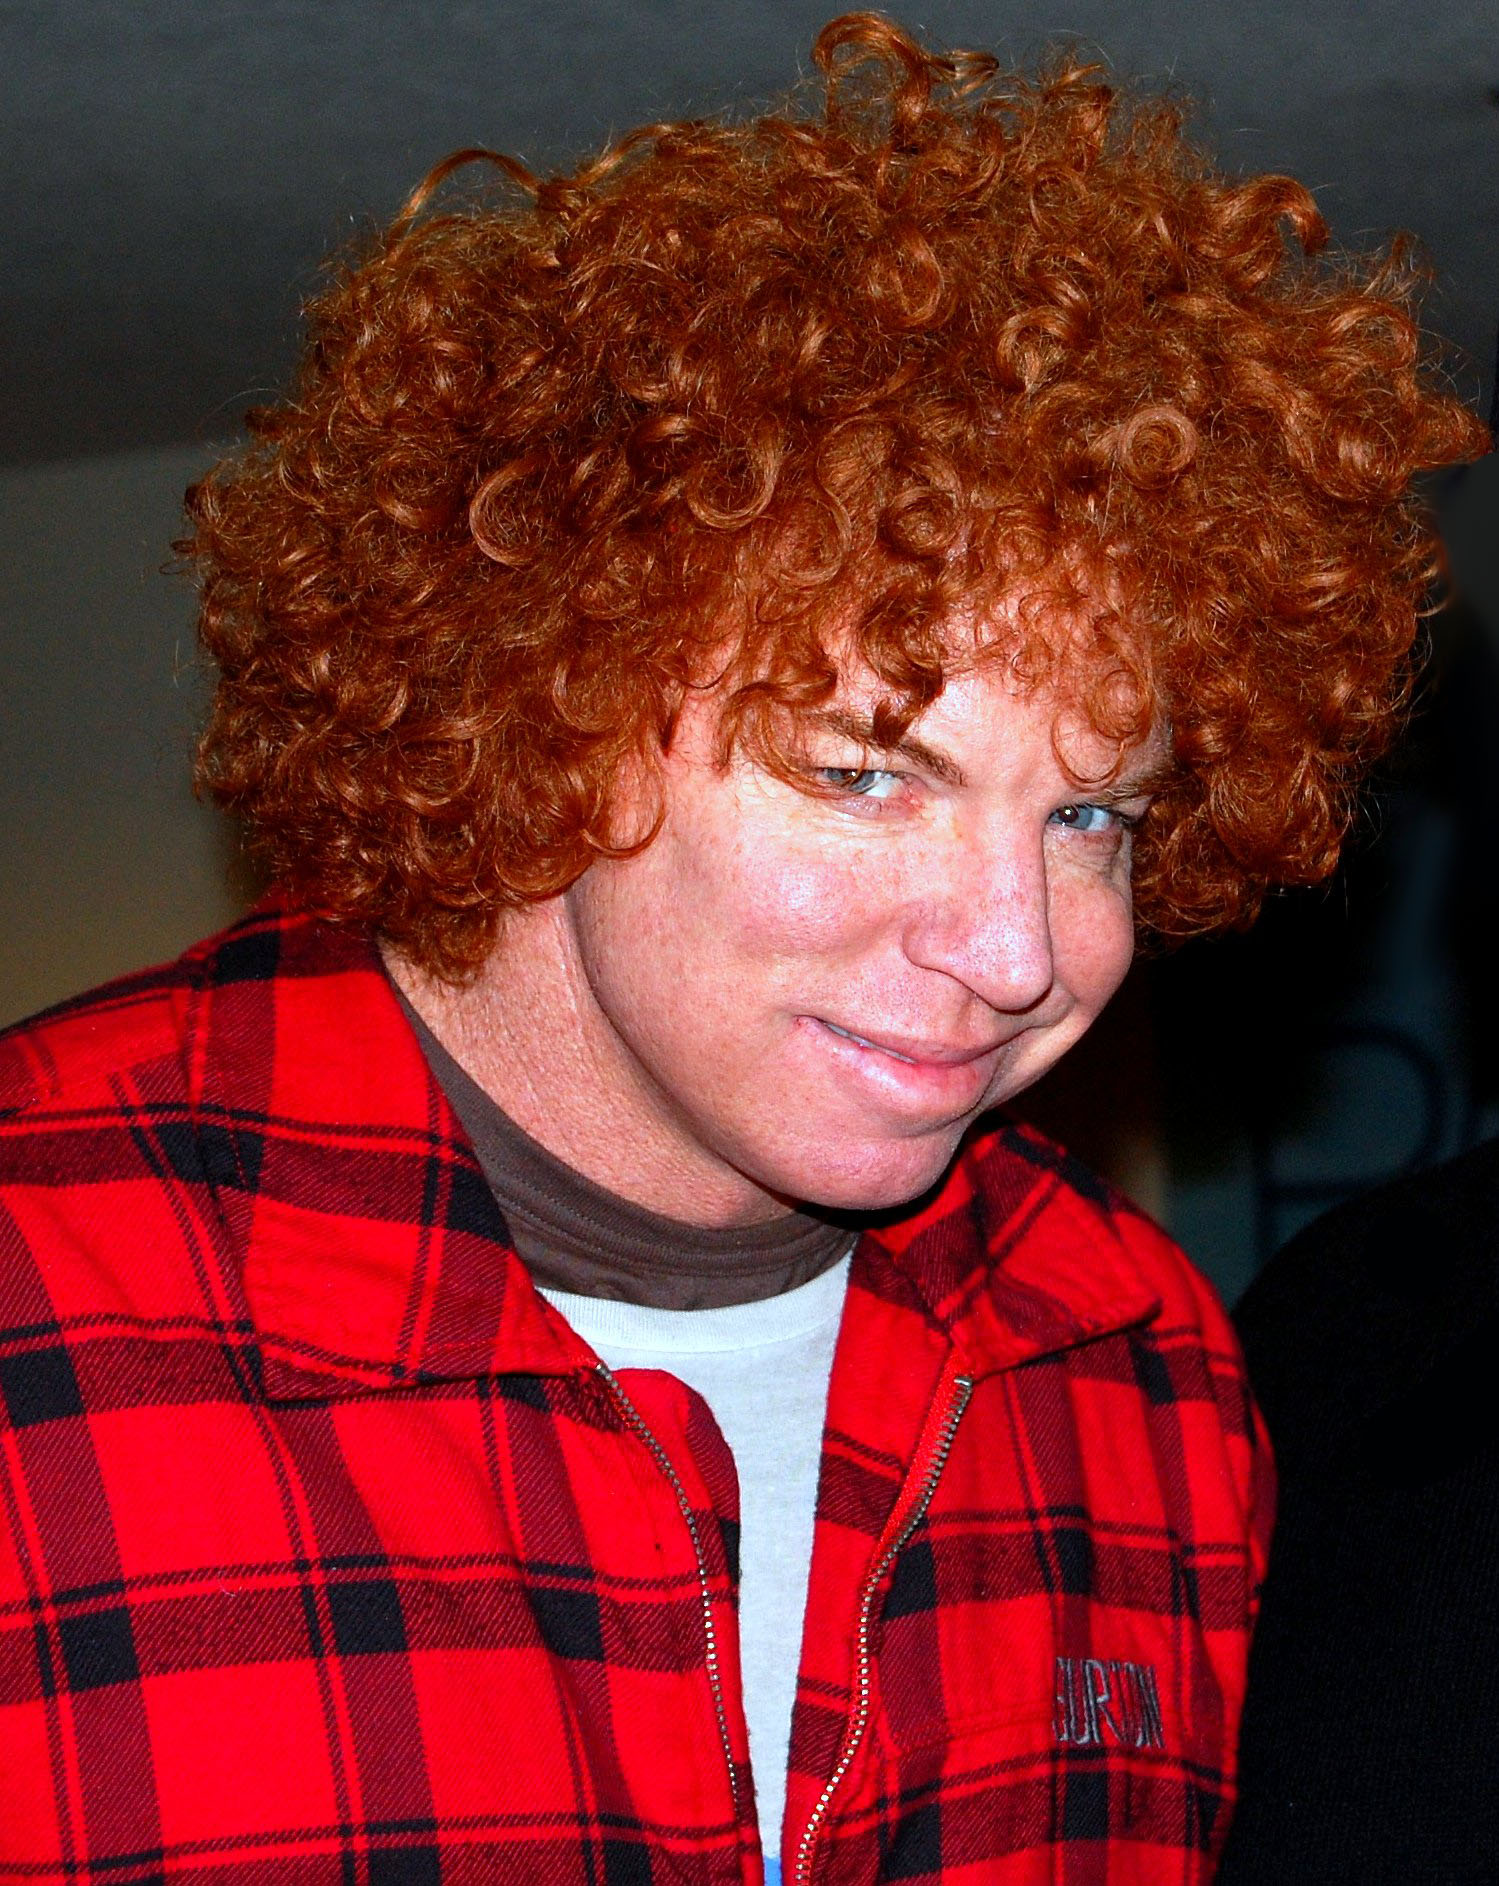 Carrot Top's top is sure... carrot-y. (Via Wikimedia)